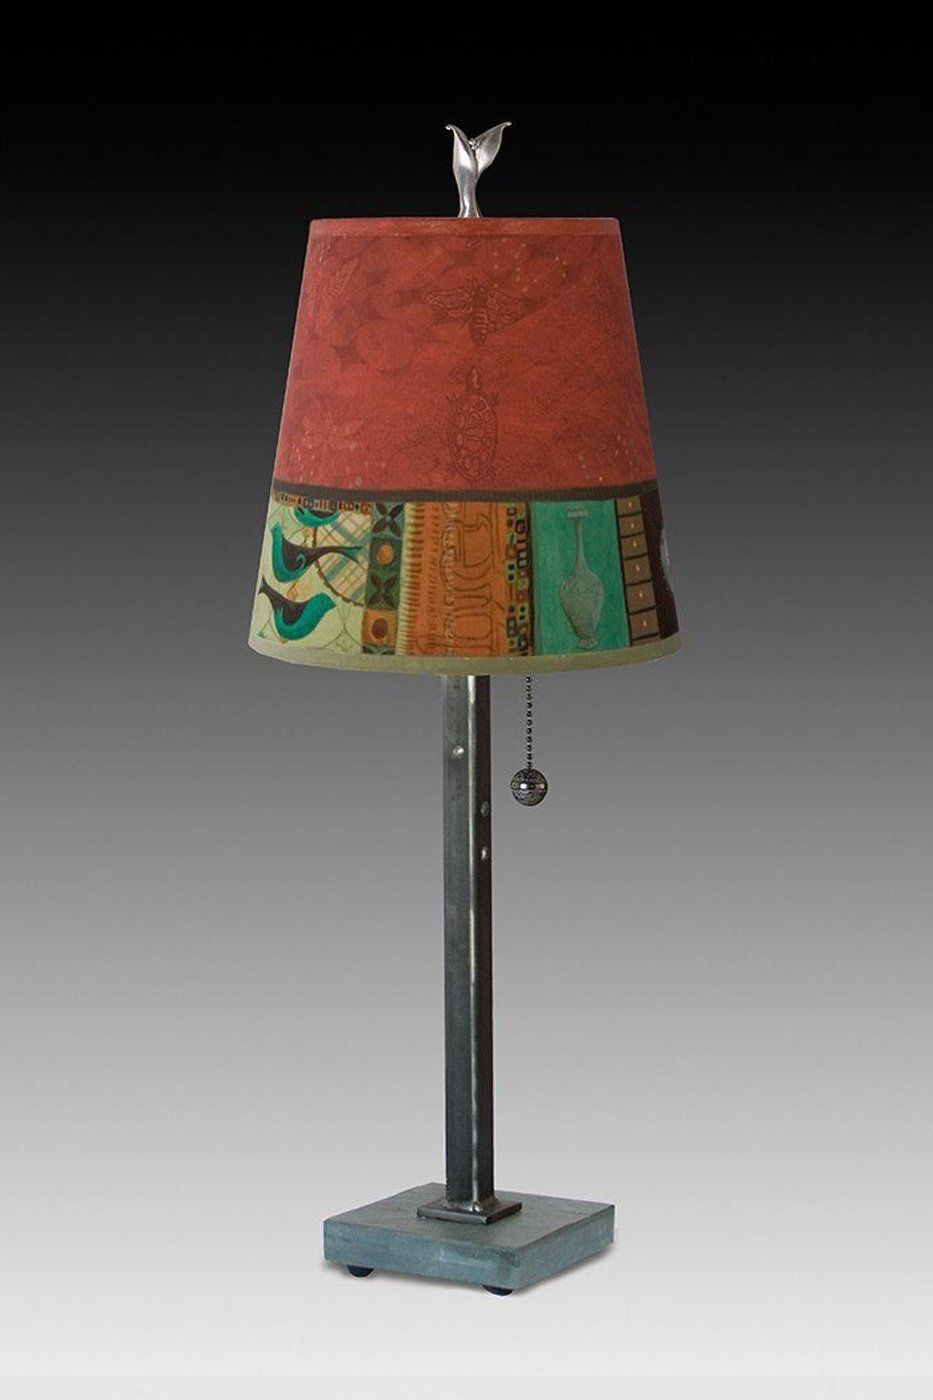 Steel Table Lamp with Small Drum Shade in Red Match